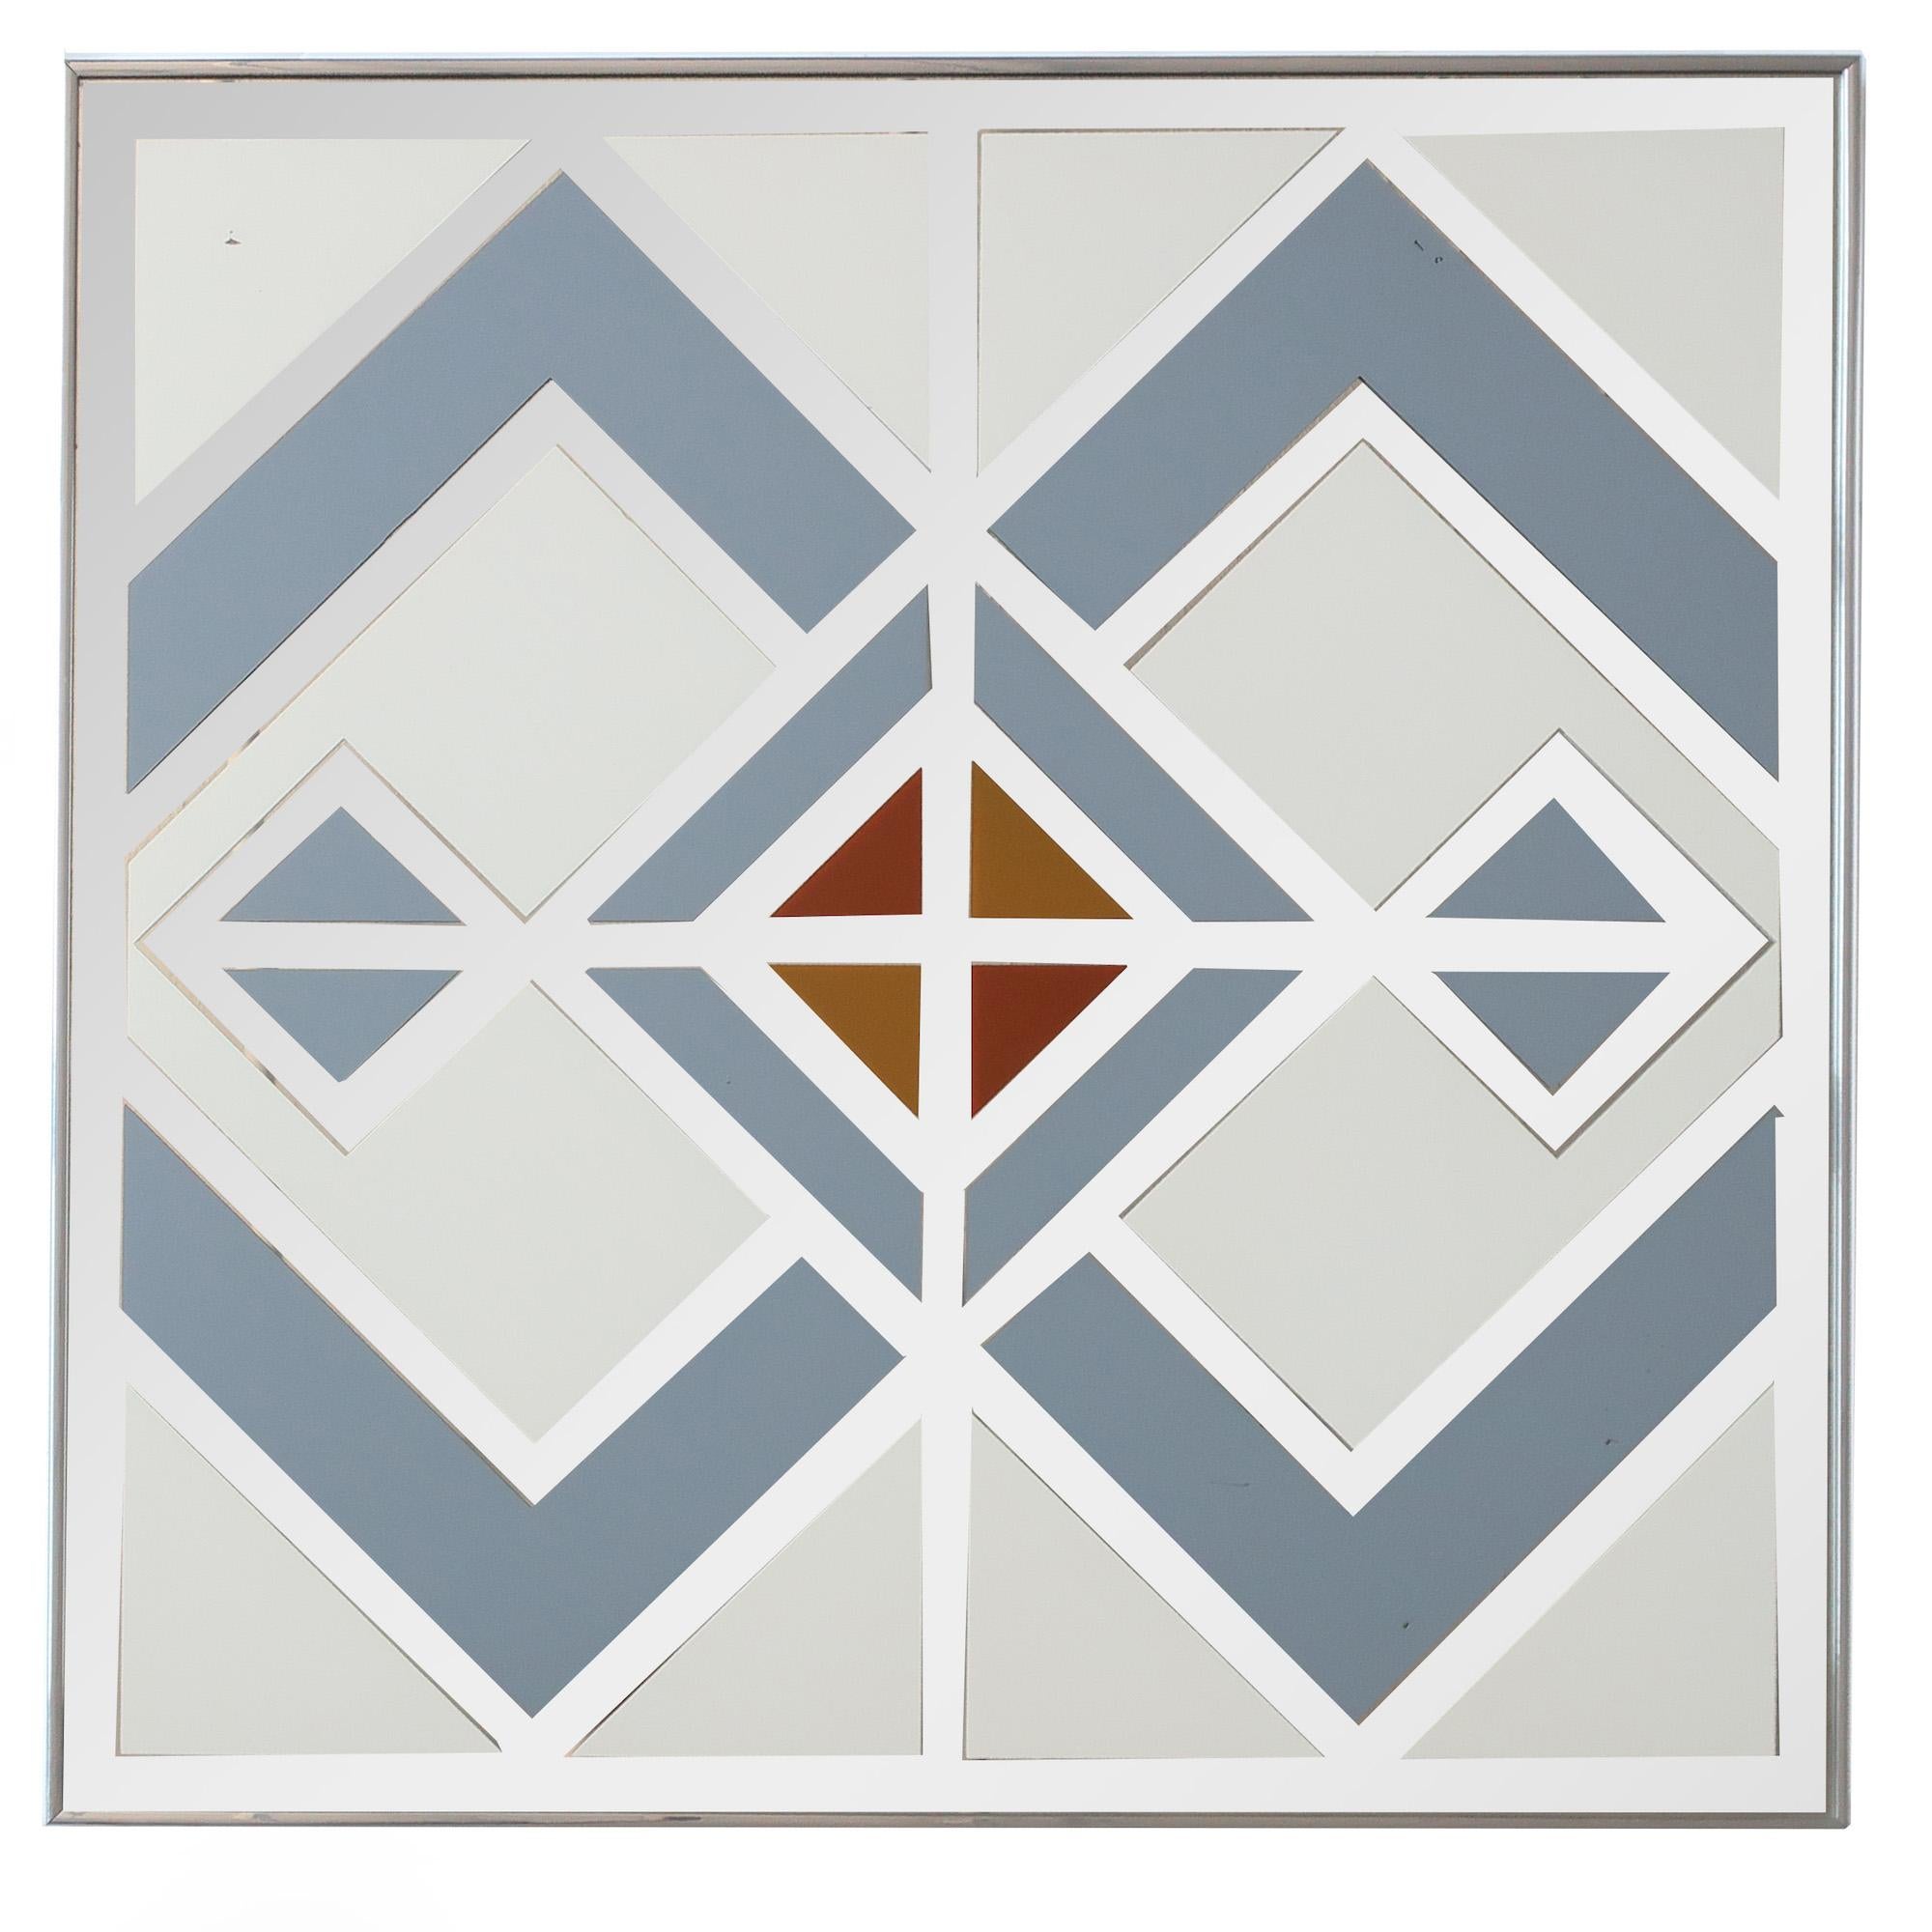 In the style of Jim Rosloff ’s work for Academy Arts and Turner Wall Accessories, this monumental Mid-Century Modern mirror has a hand silk-screened white, grey, brown, and orange geometric design painted on the mirror. In a brushed aluminum frame,